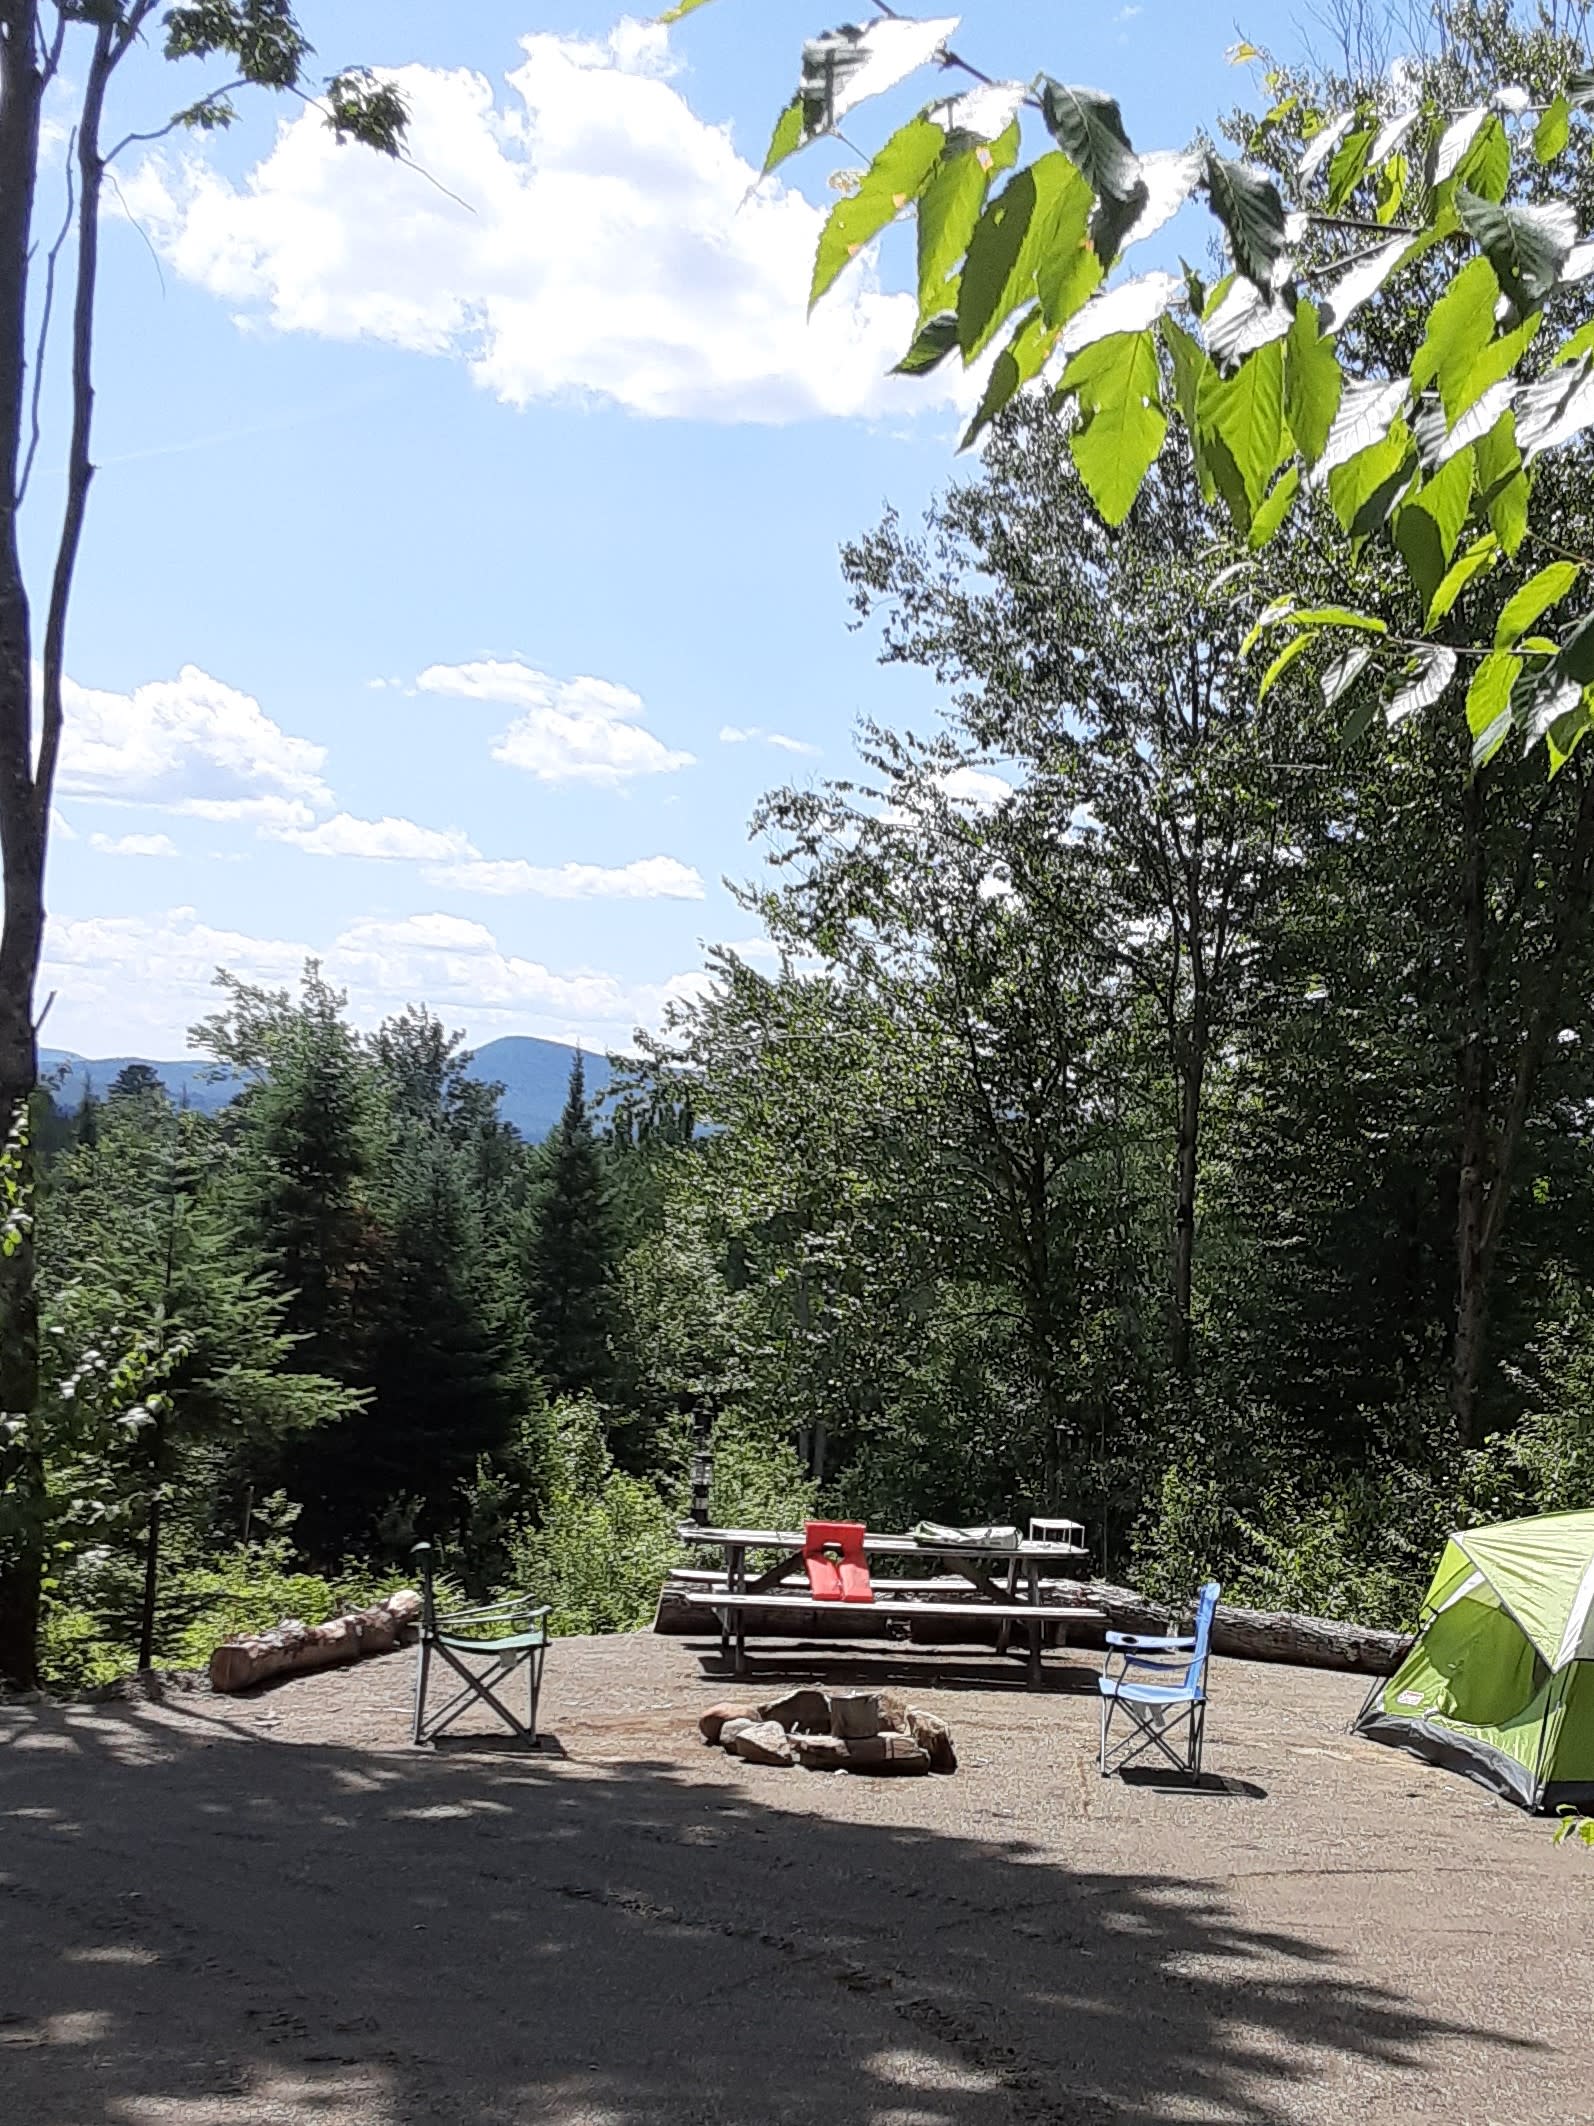 RV/Tent Site #1. (View of Maidstone Mt, Vt.)